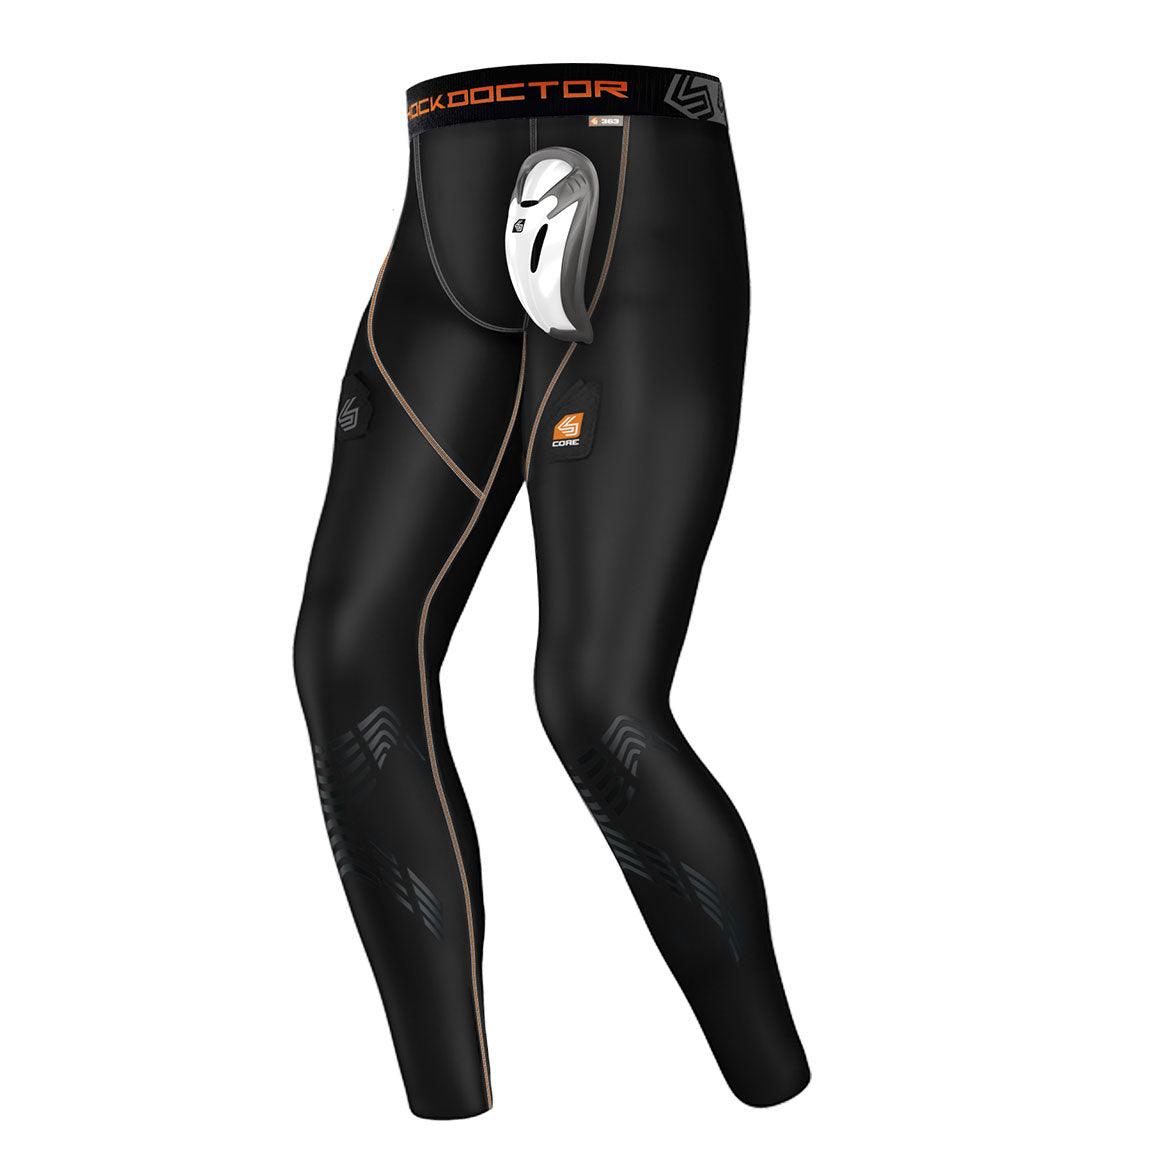 Core Hockey Pant with Bio-Flex Cup - Sports Excellence